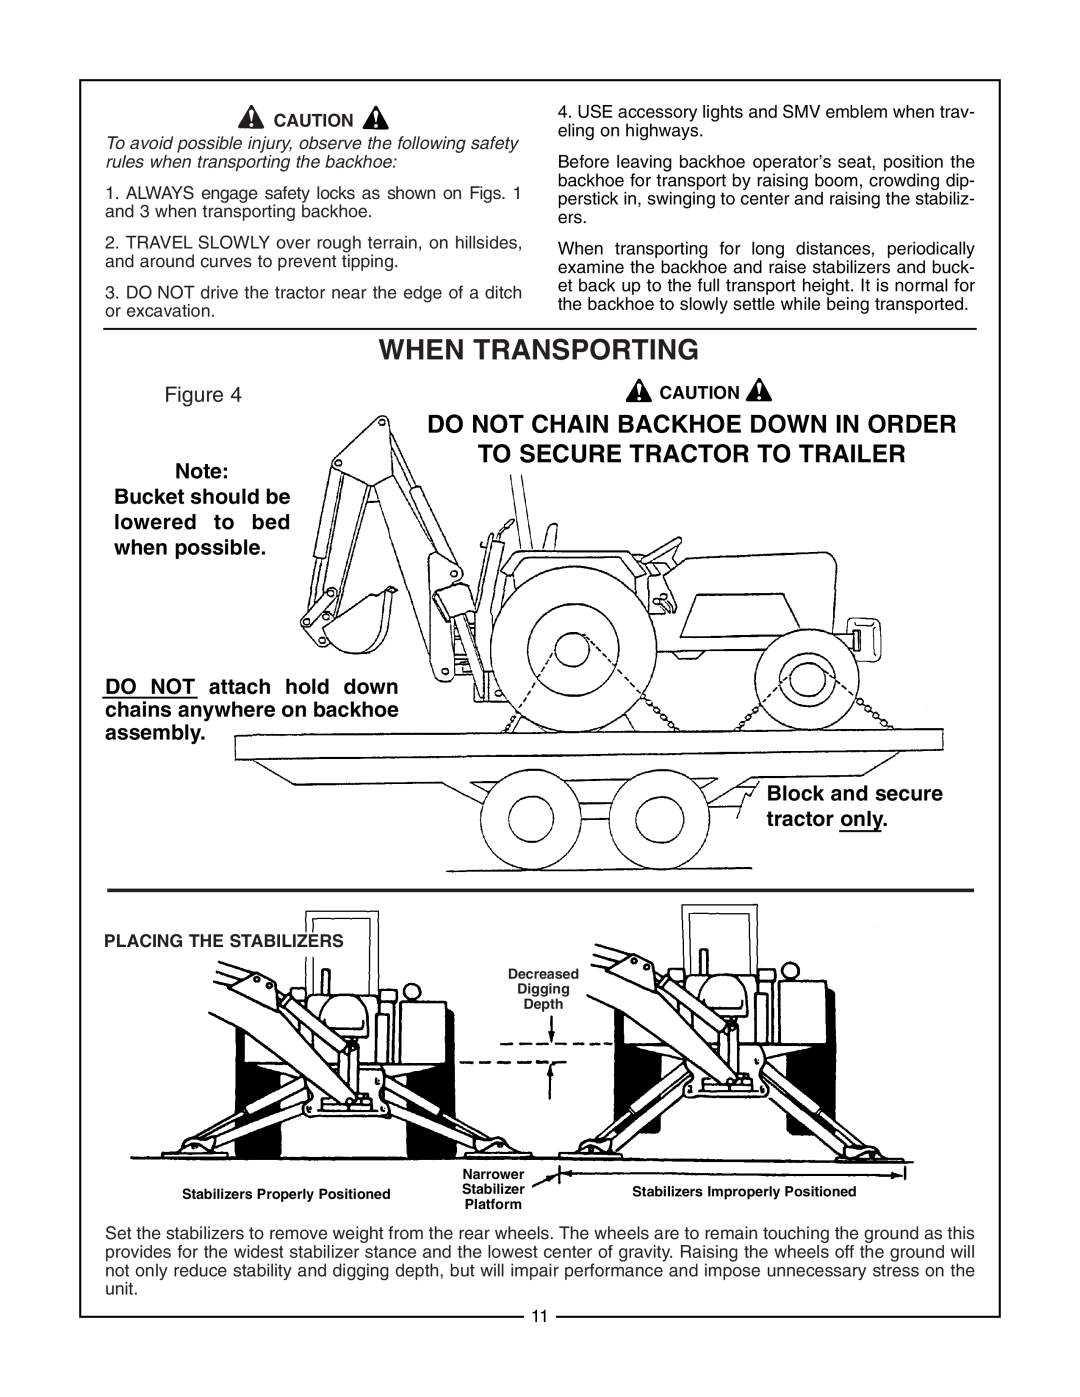 Bush Hog 2165 When Transporting, Do Not Chain Backhoe Down In Order To Secure Tractor To Trailer, Placing The Stabilizers 